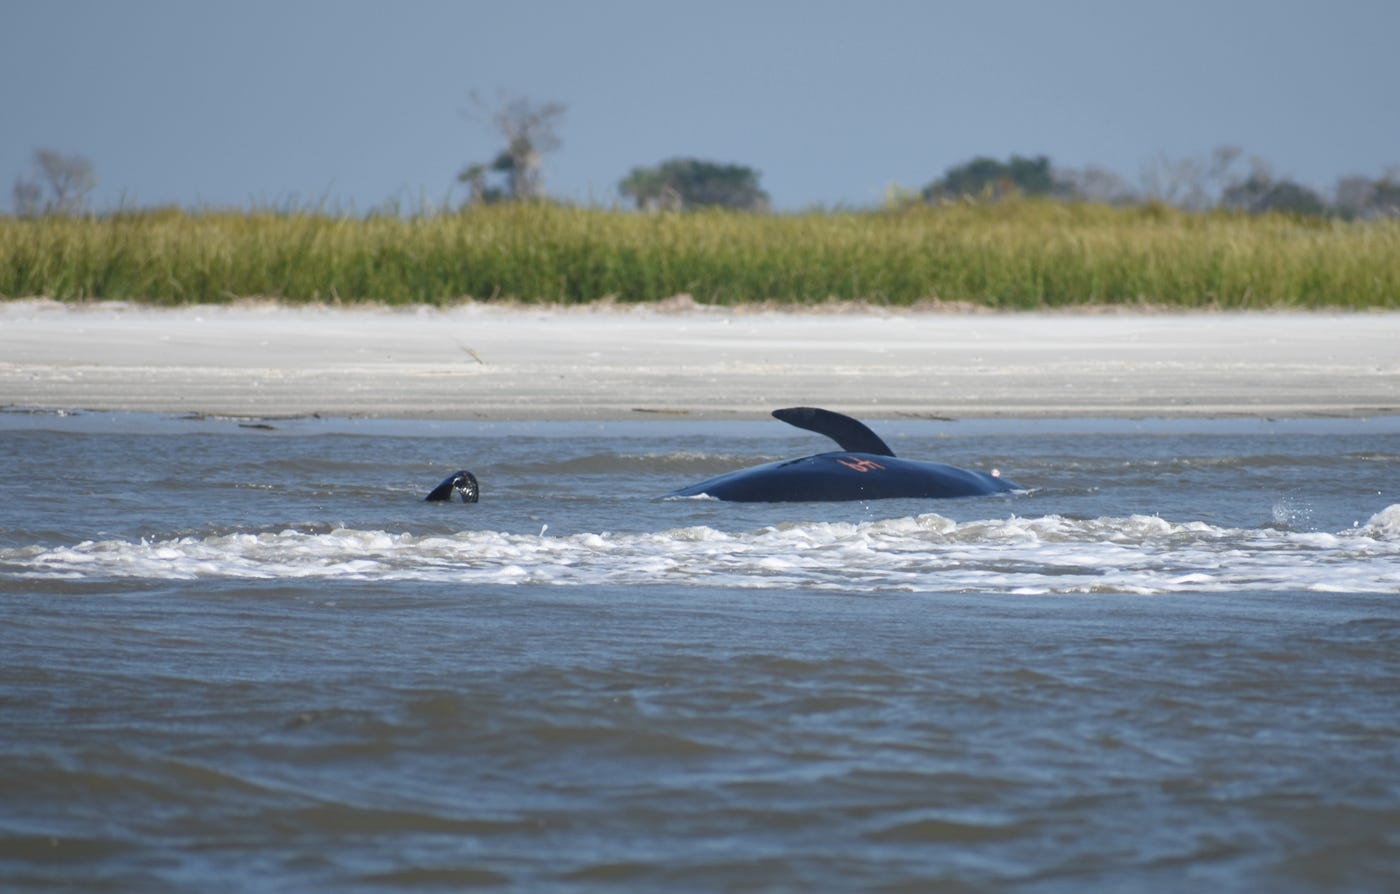 Whales from Georgia stranding beach themselves in South Carolina